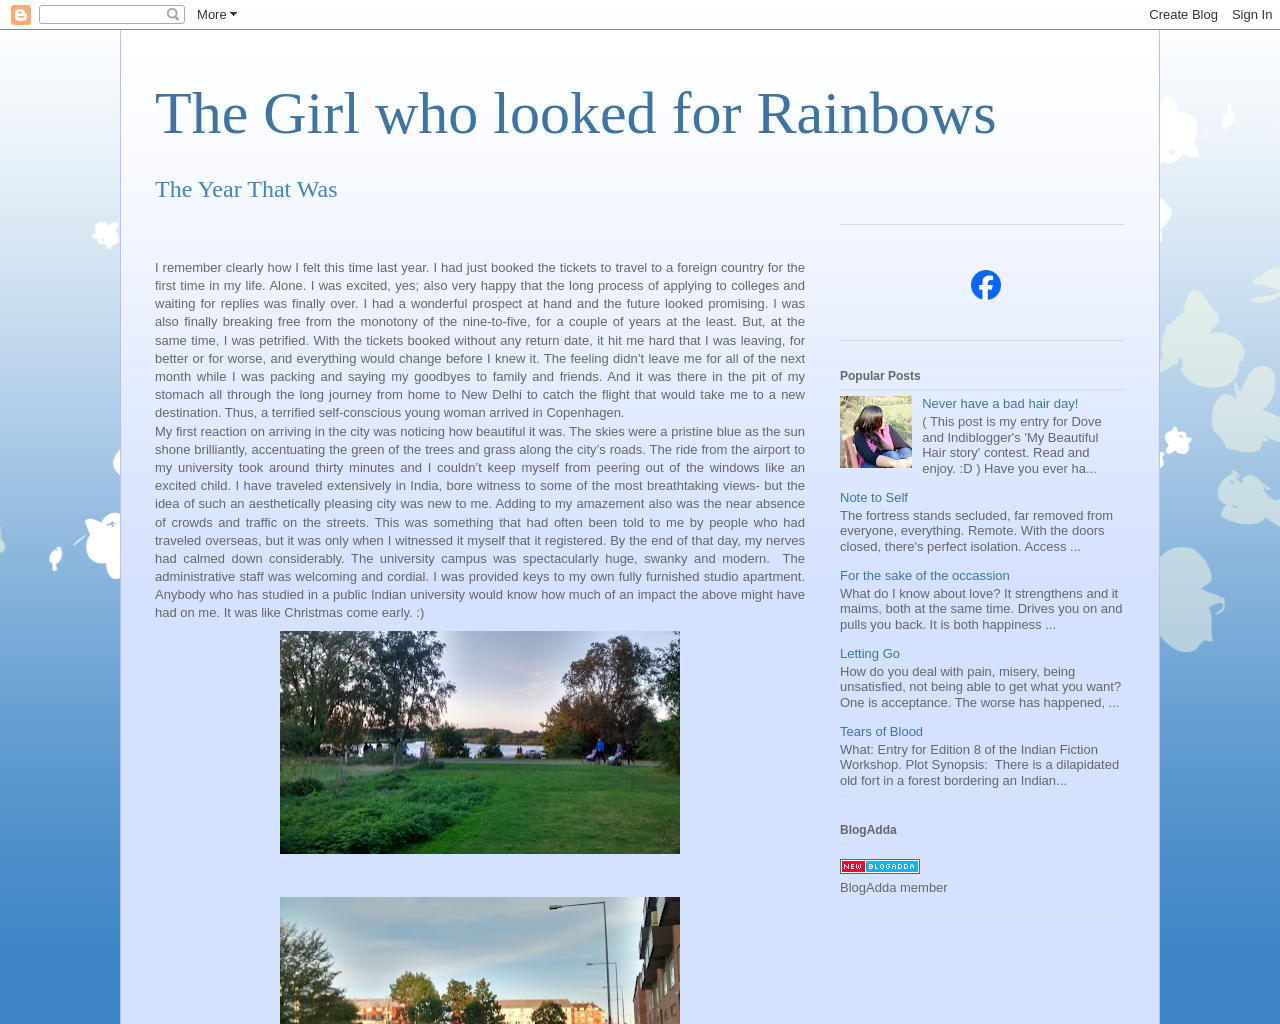 The Girl who looked for Rainbows